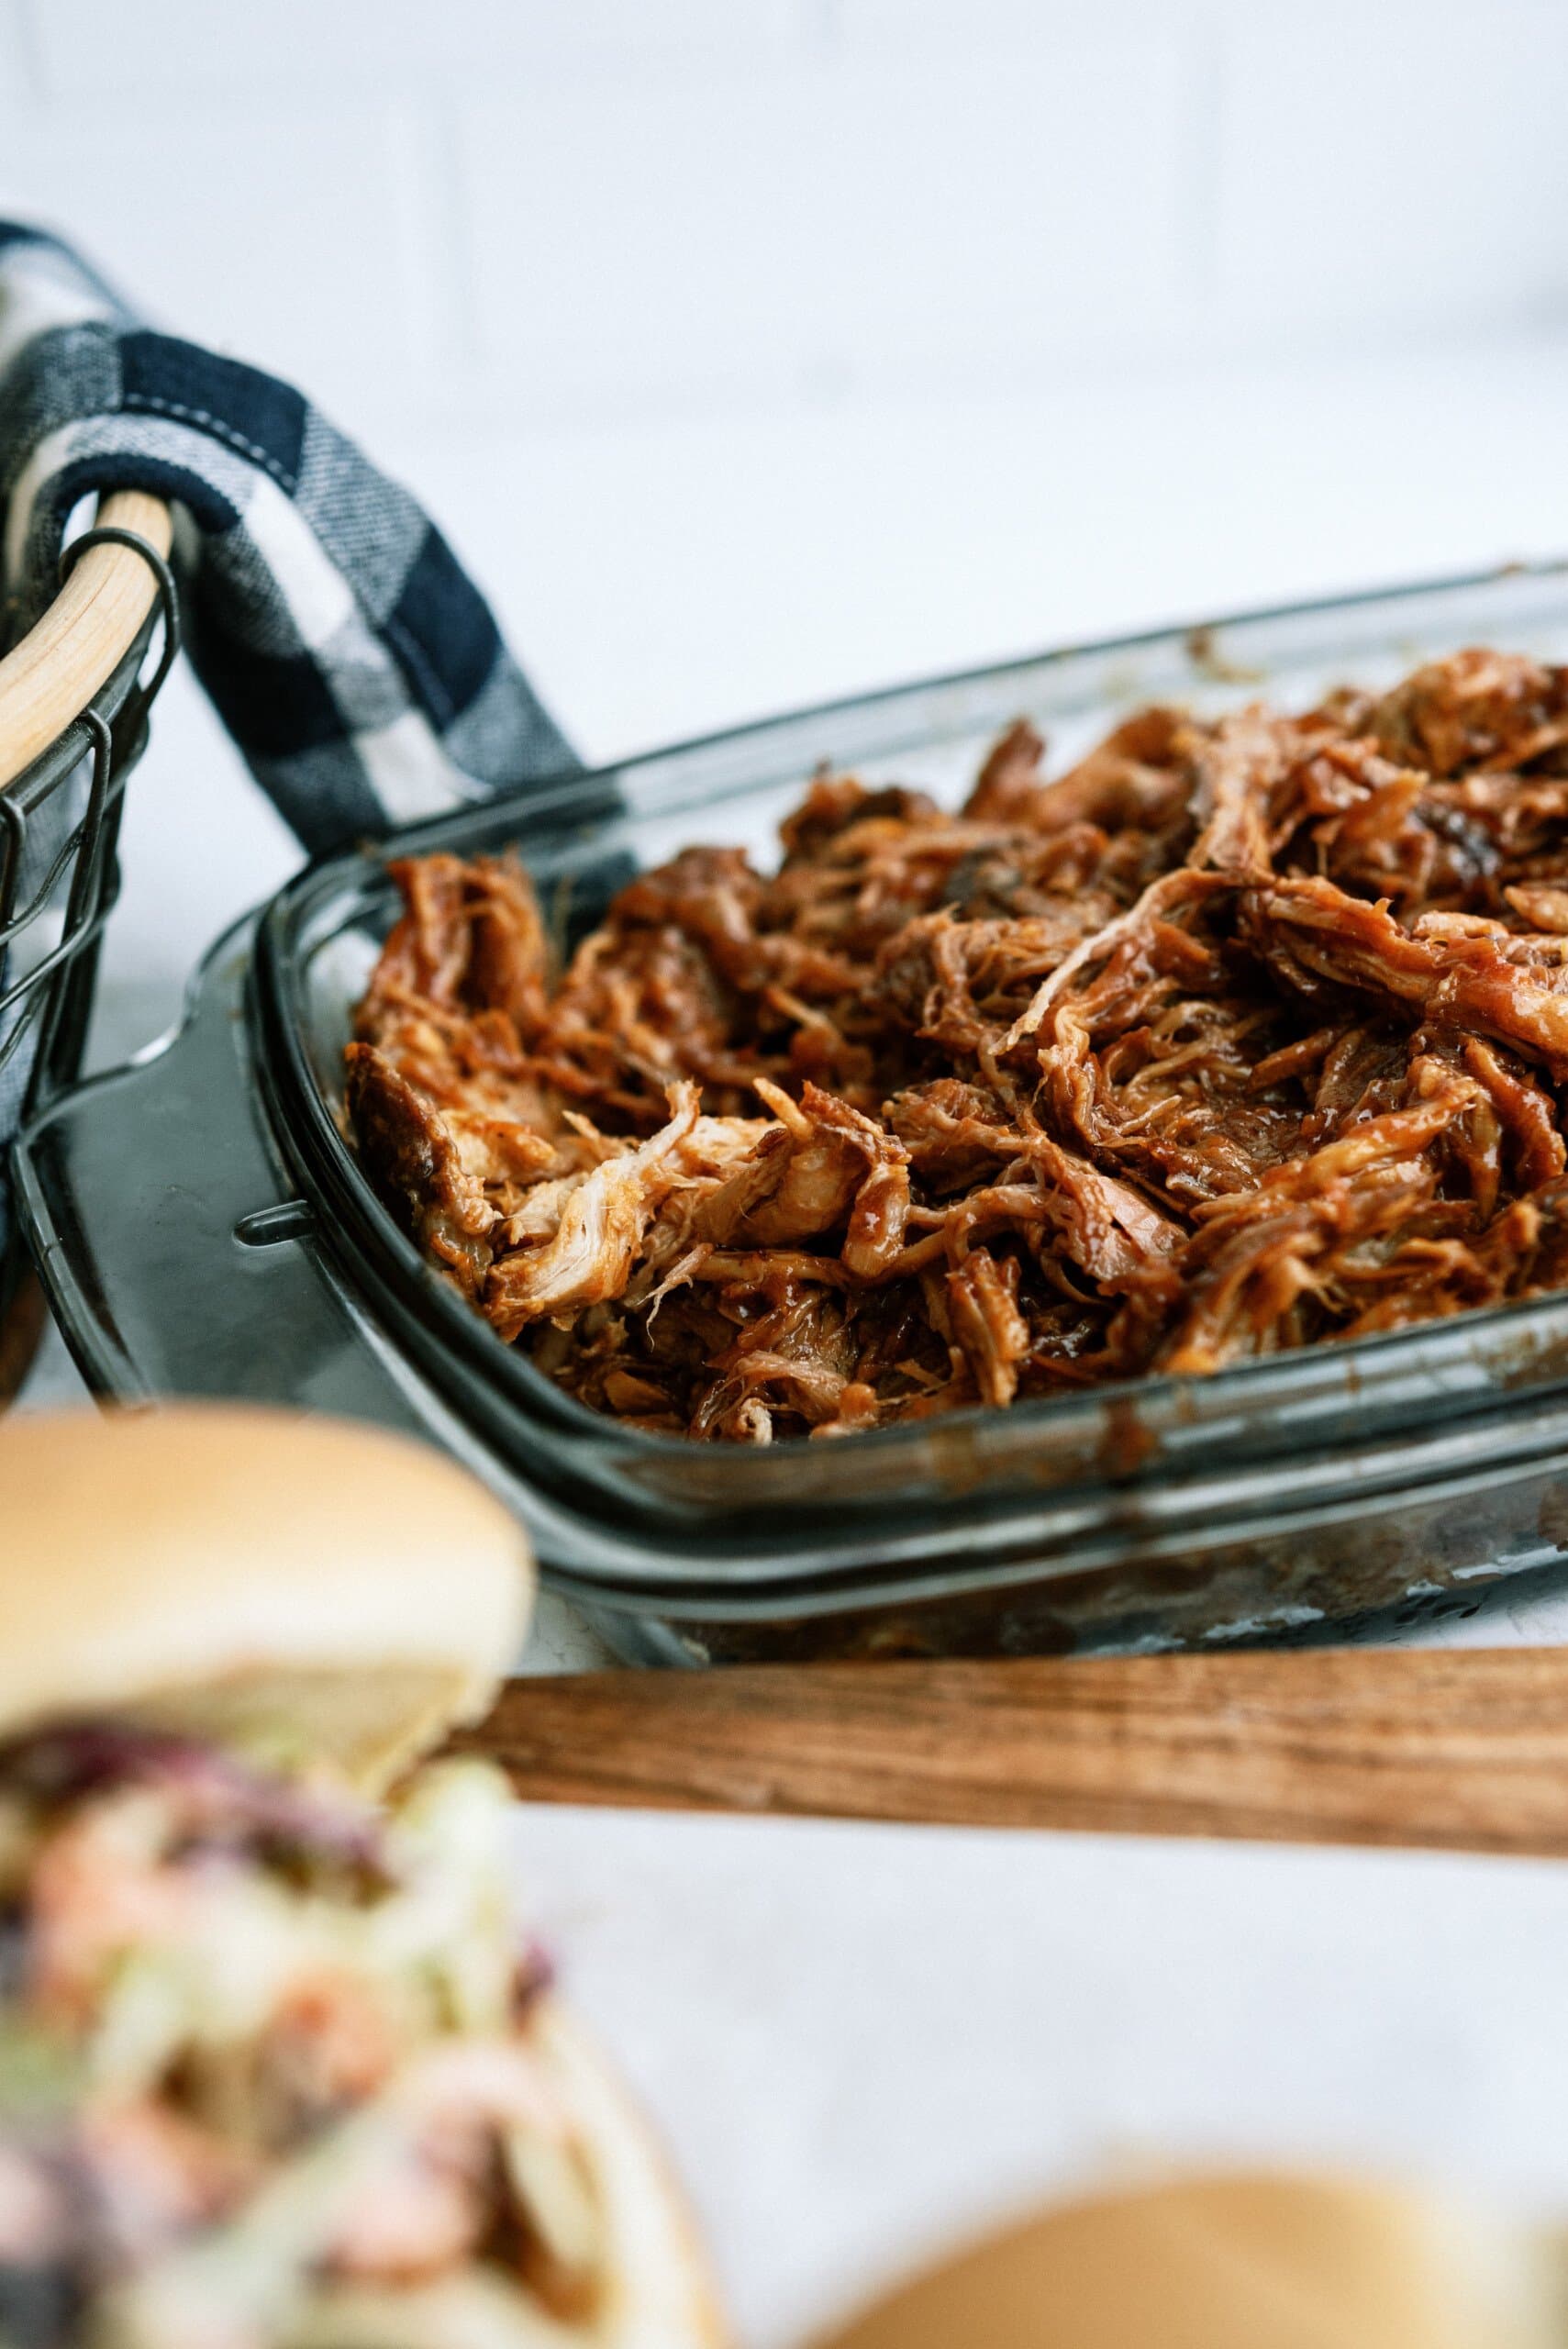 root beer pulled pork in a glass baking dish